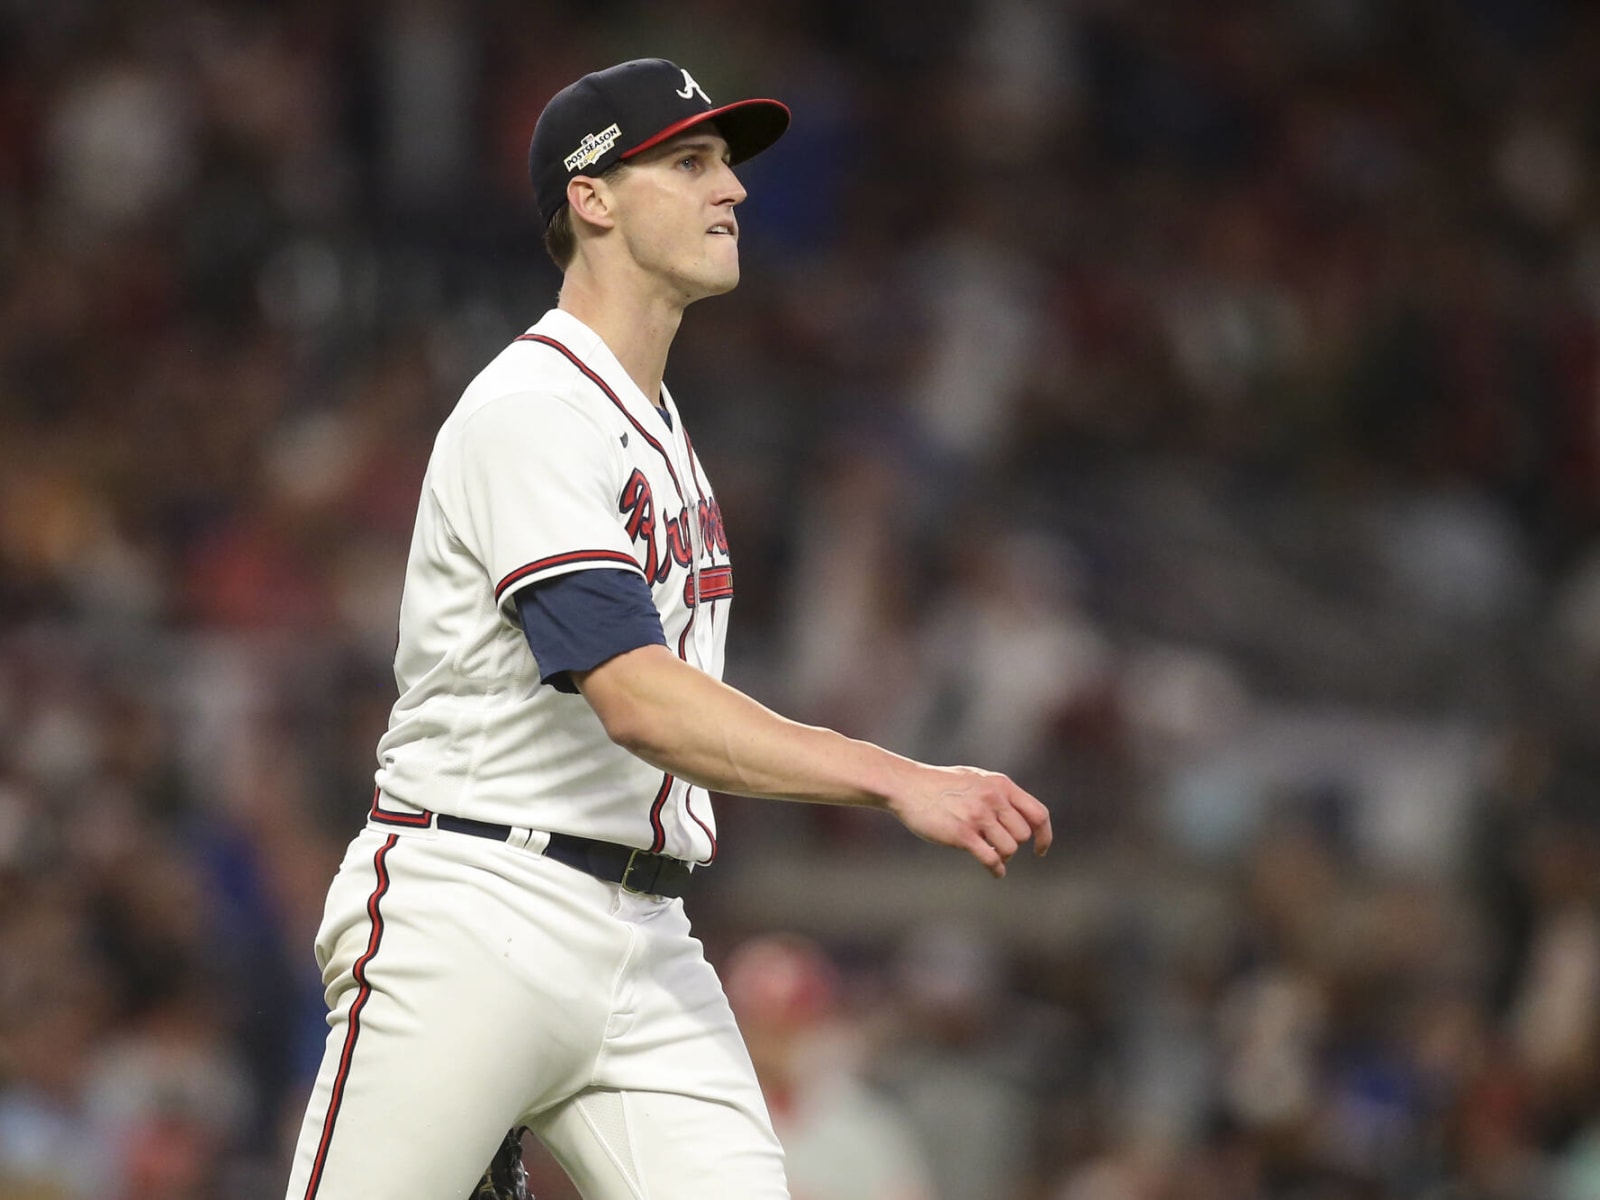 Braves: A glimpse at the 2023 Opening Day roster